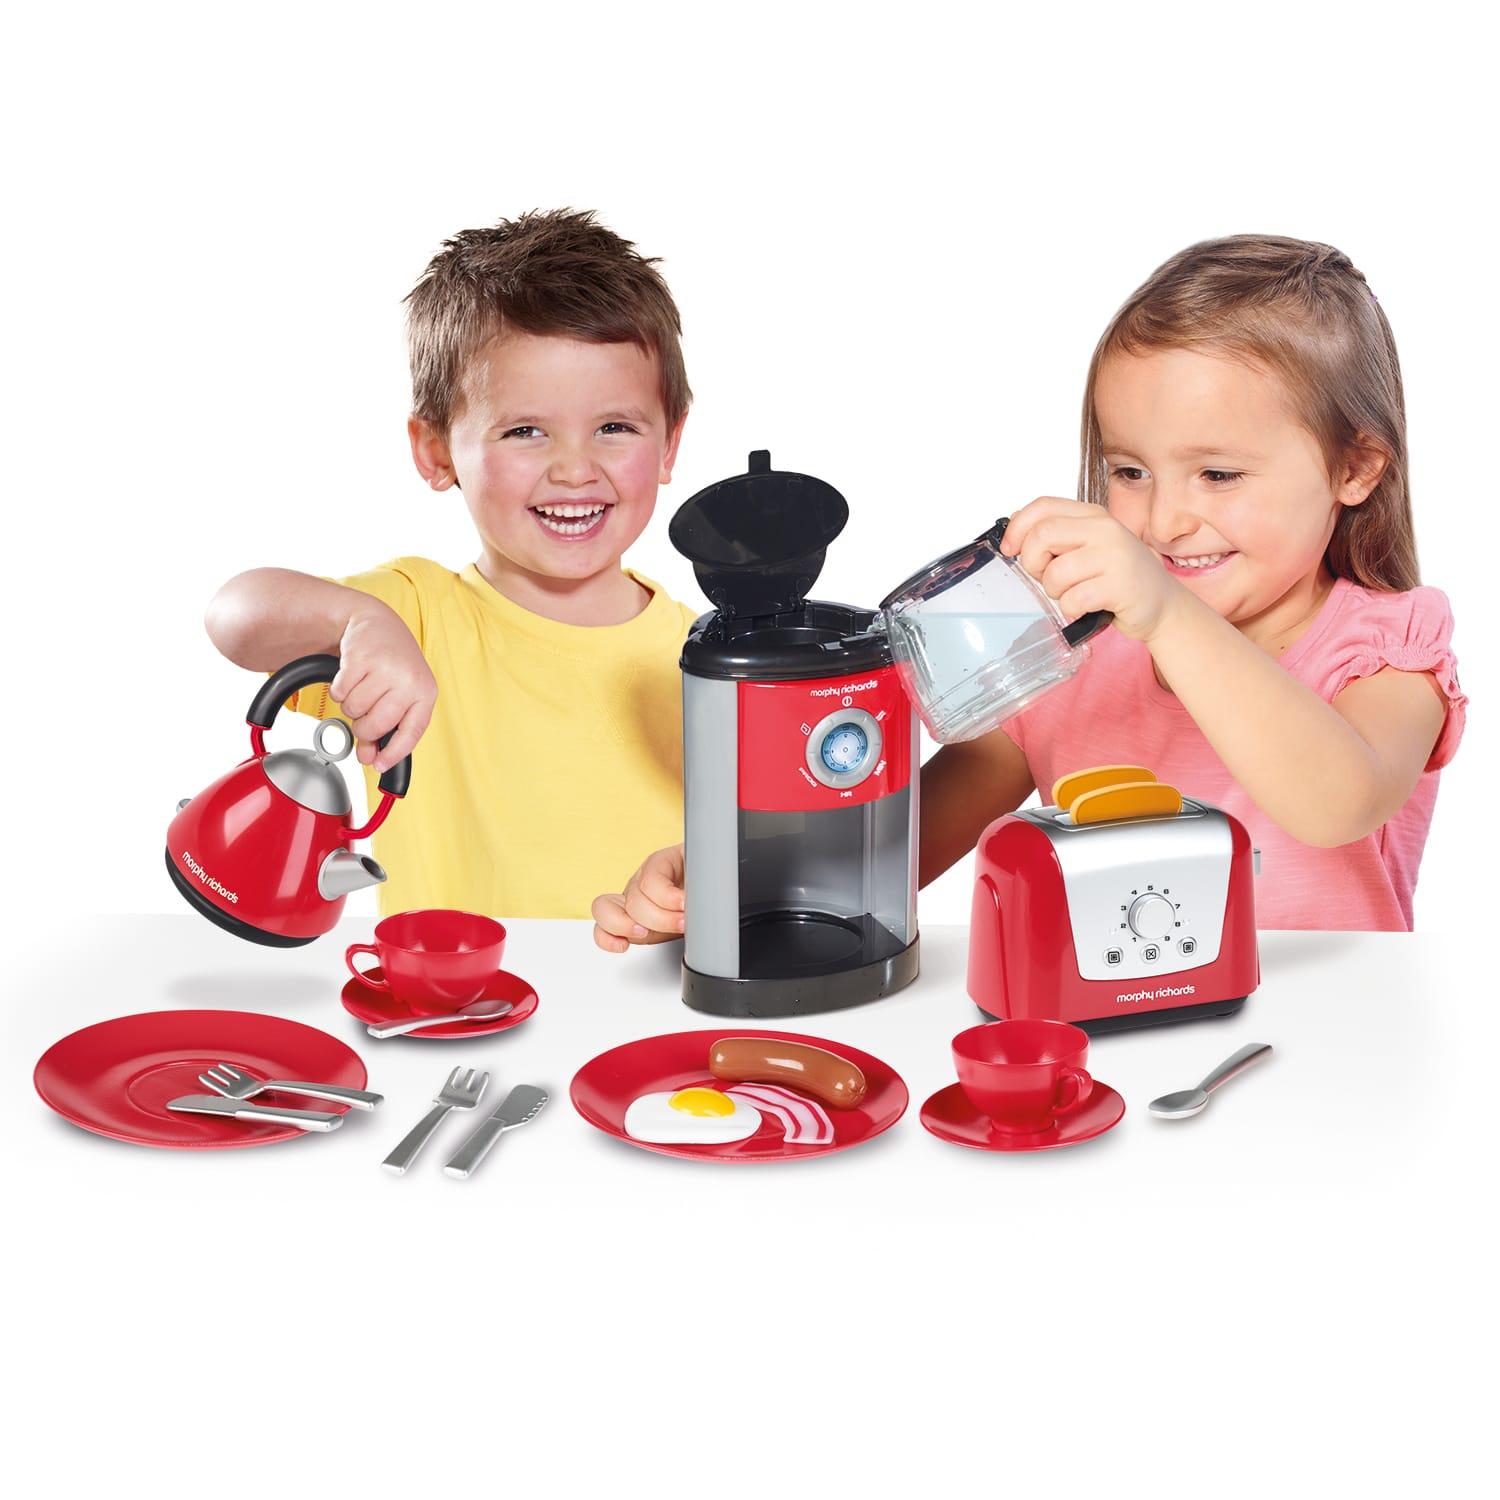 Toy Morphy Richards Kettle Small Child Size For Kitchen Role Play Fun BRAND NEW 